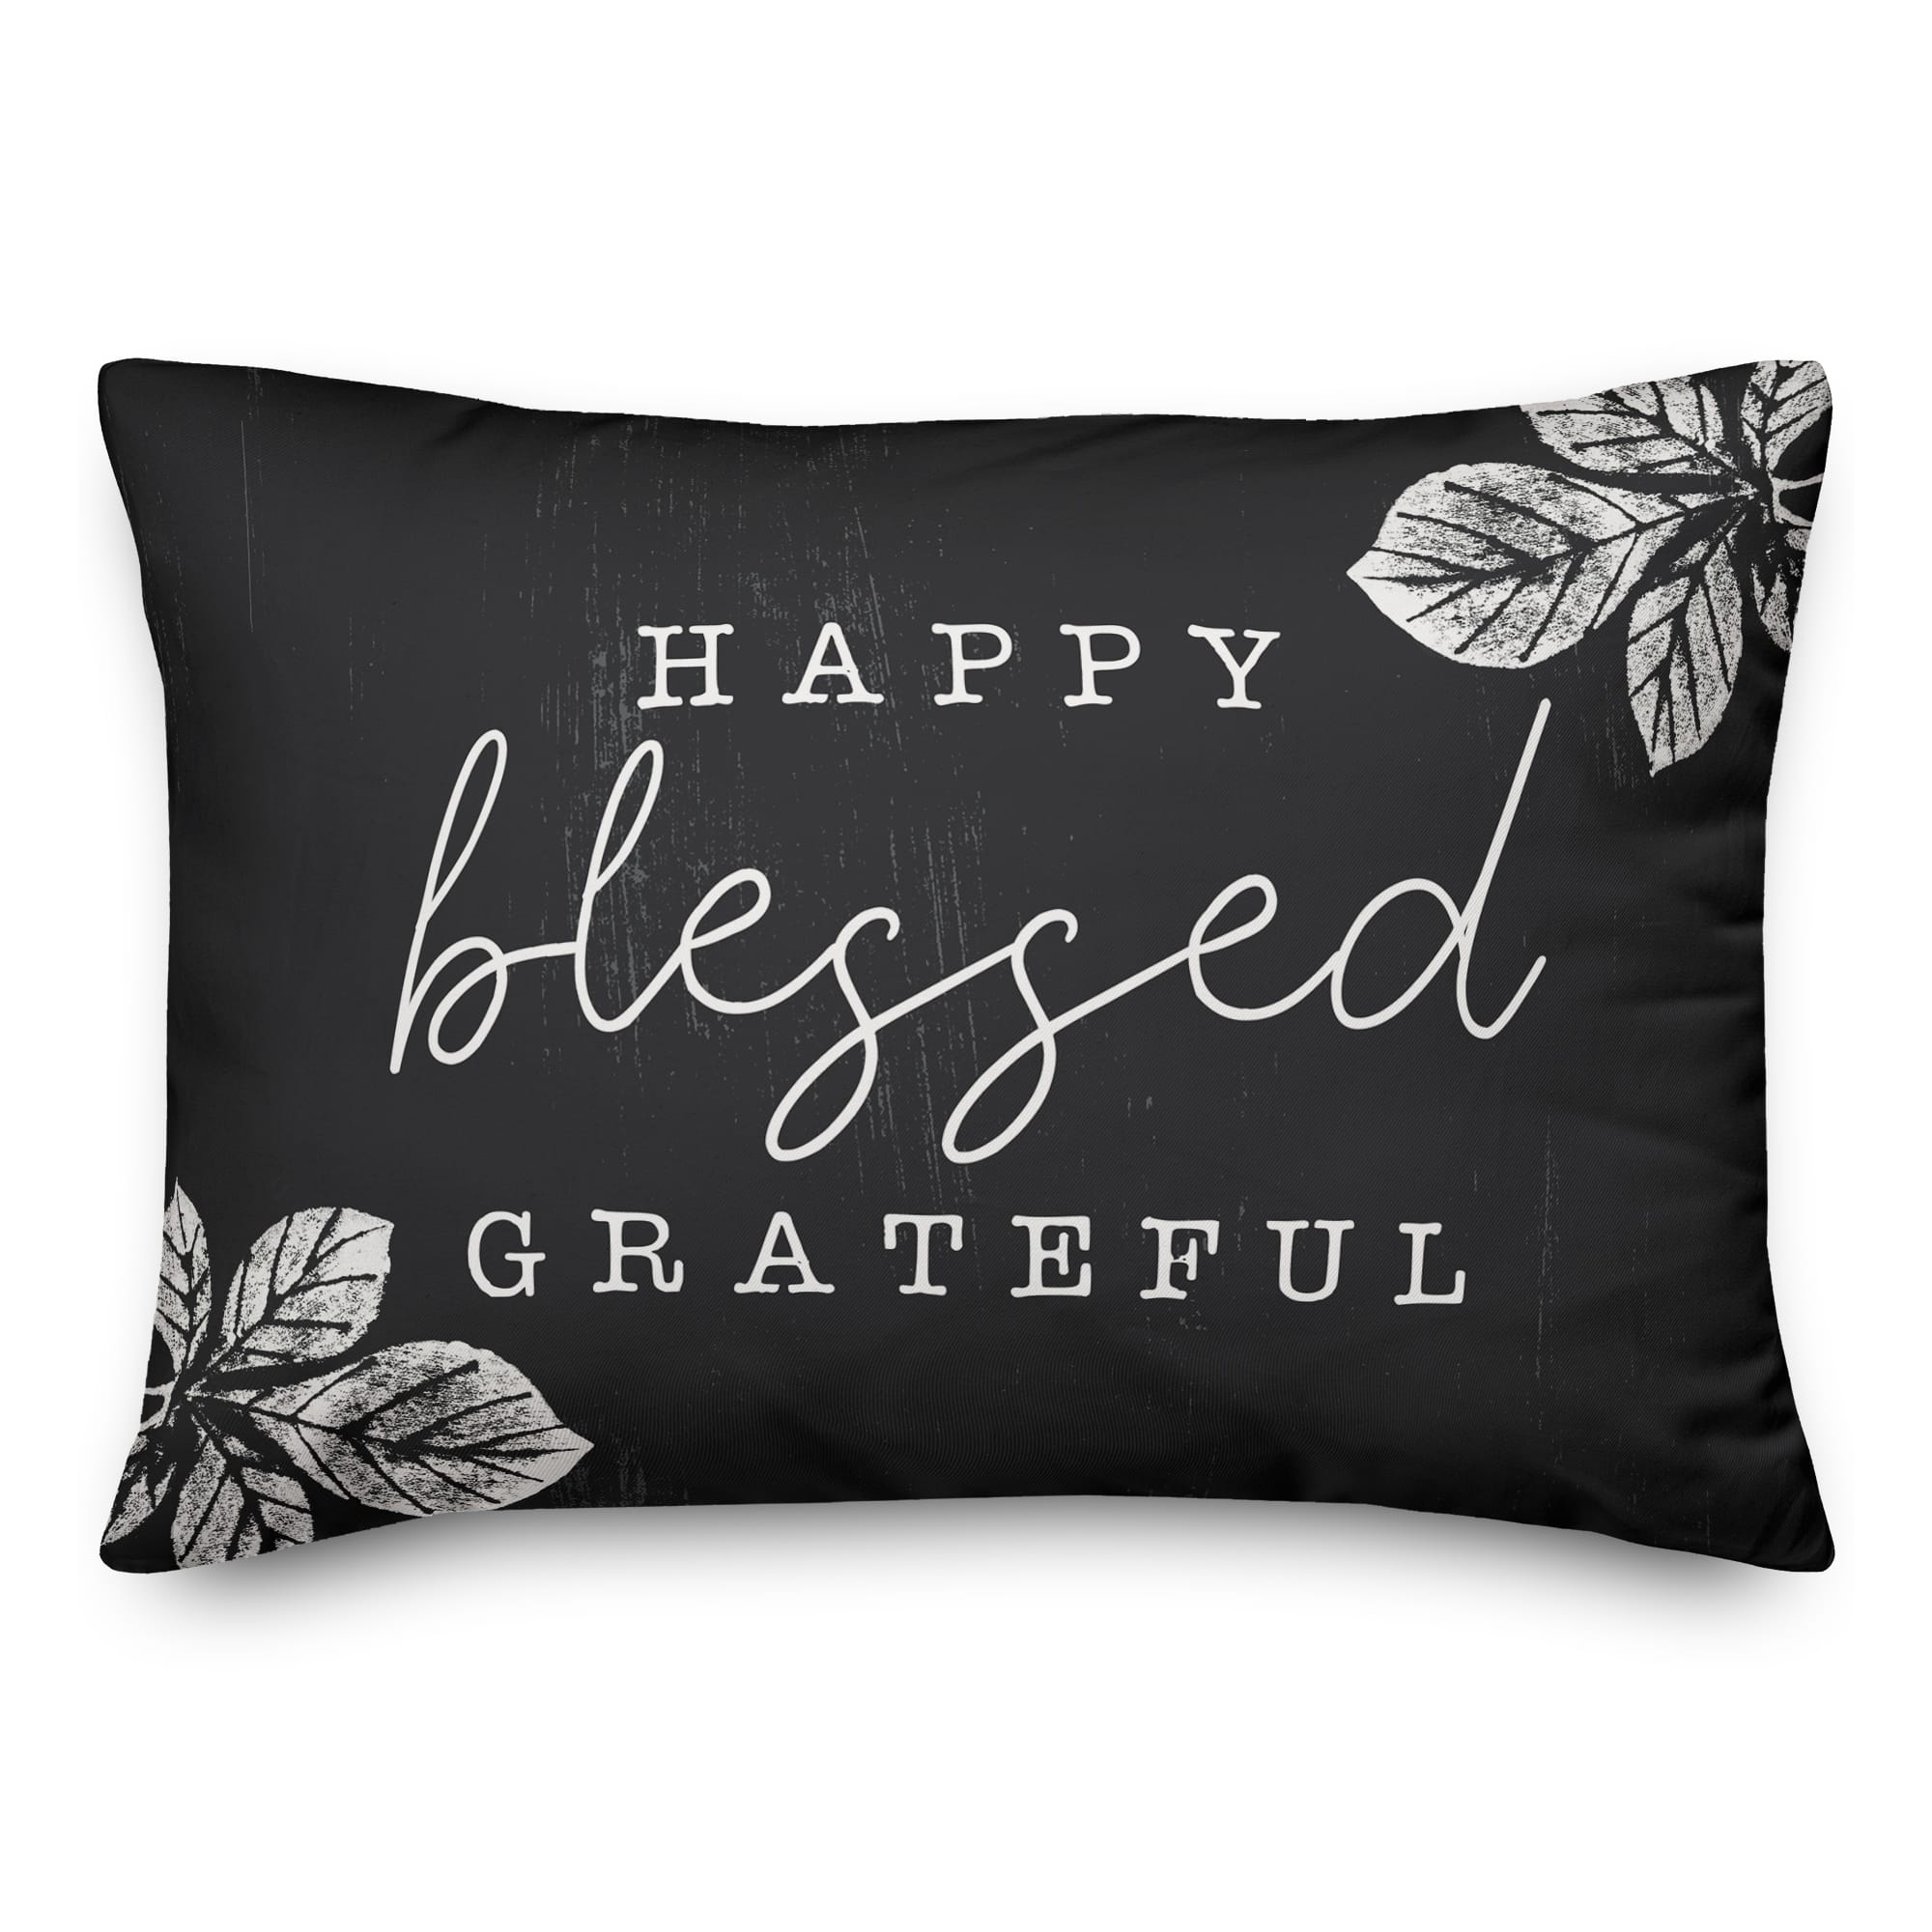 Black Happy Blessed Grateful Throw Pillow